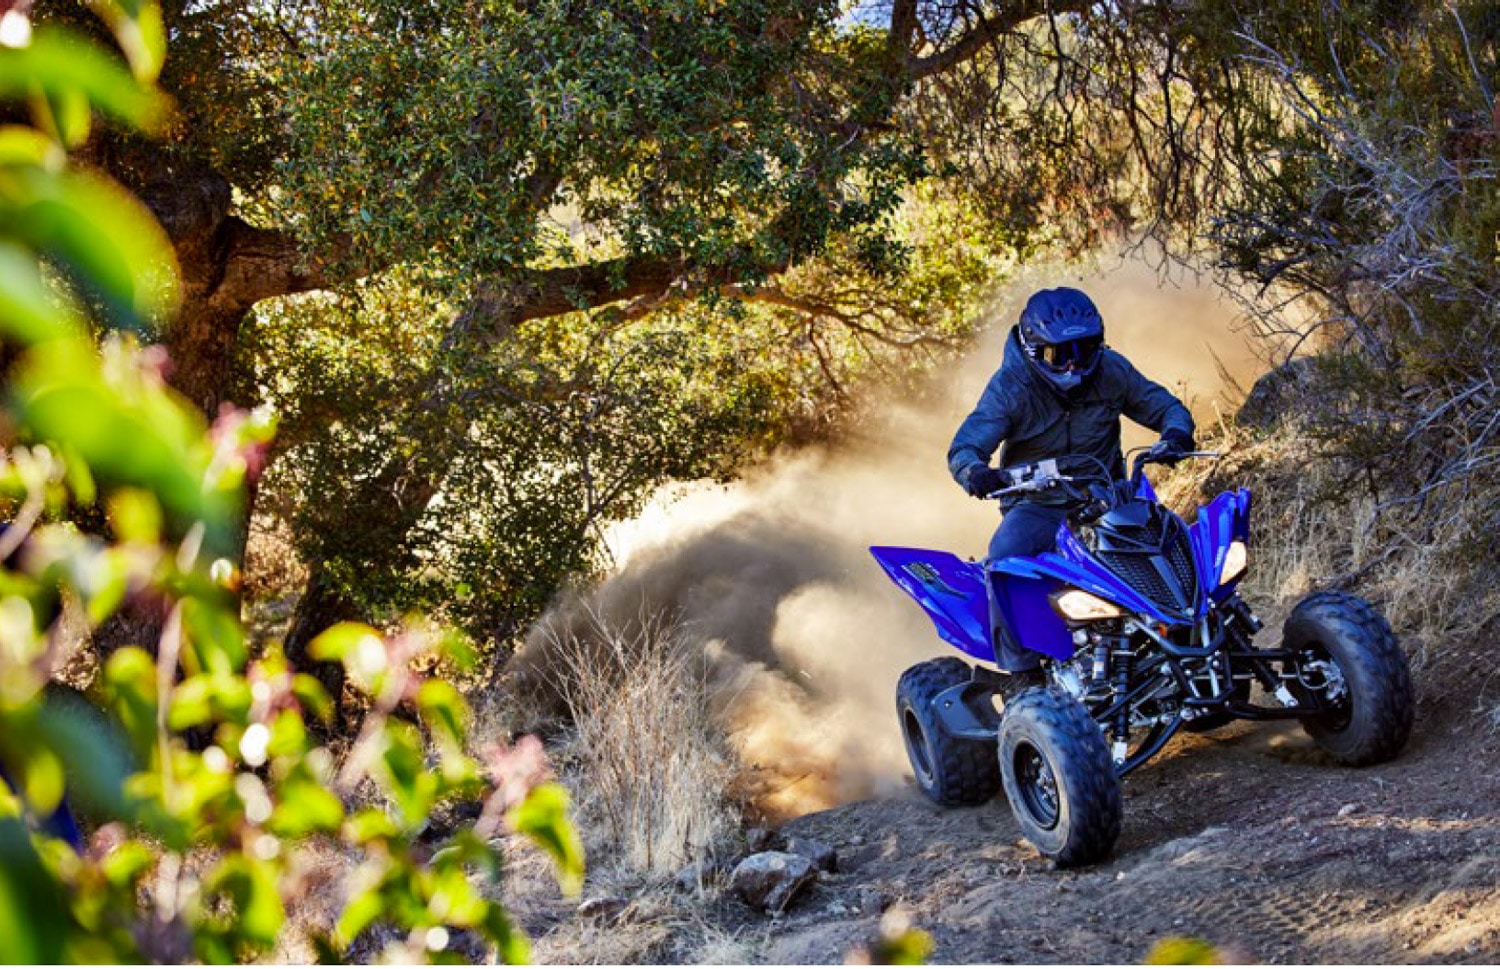 Side-by-Side Vehicles are recommended for use only by licensed drivers 16 years and older. ATVs over 90cc are recommended for use only by riders 16 years and older. ABOUT YAMAHA MOTOR CANADA: Yamaha Motor Canada was incorporated in 1973. Since then, the company has expanded to include eight individual product groups in addition to after-sales support with parts, accessories, lubricants, apparel, and service functions. Yamaha continues to expand its footprint, with over 400 dealers servicing Canadians from coast to coast to coast.